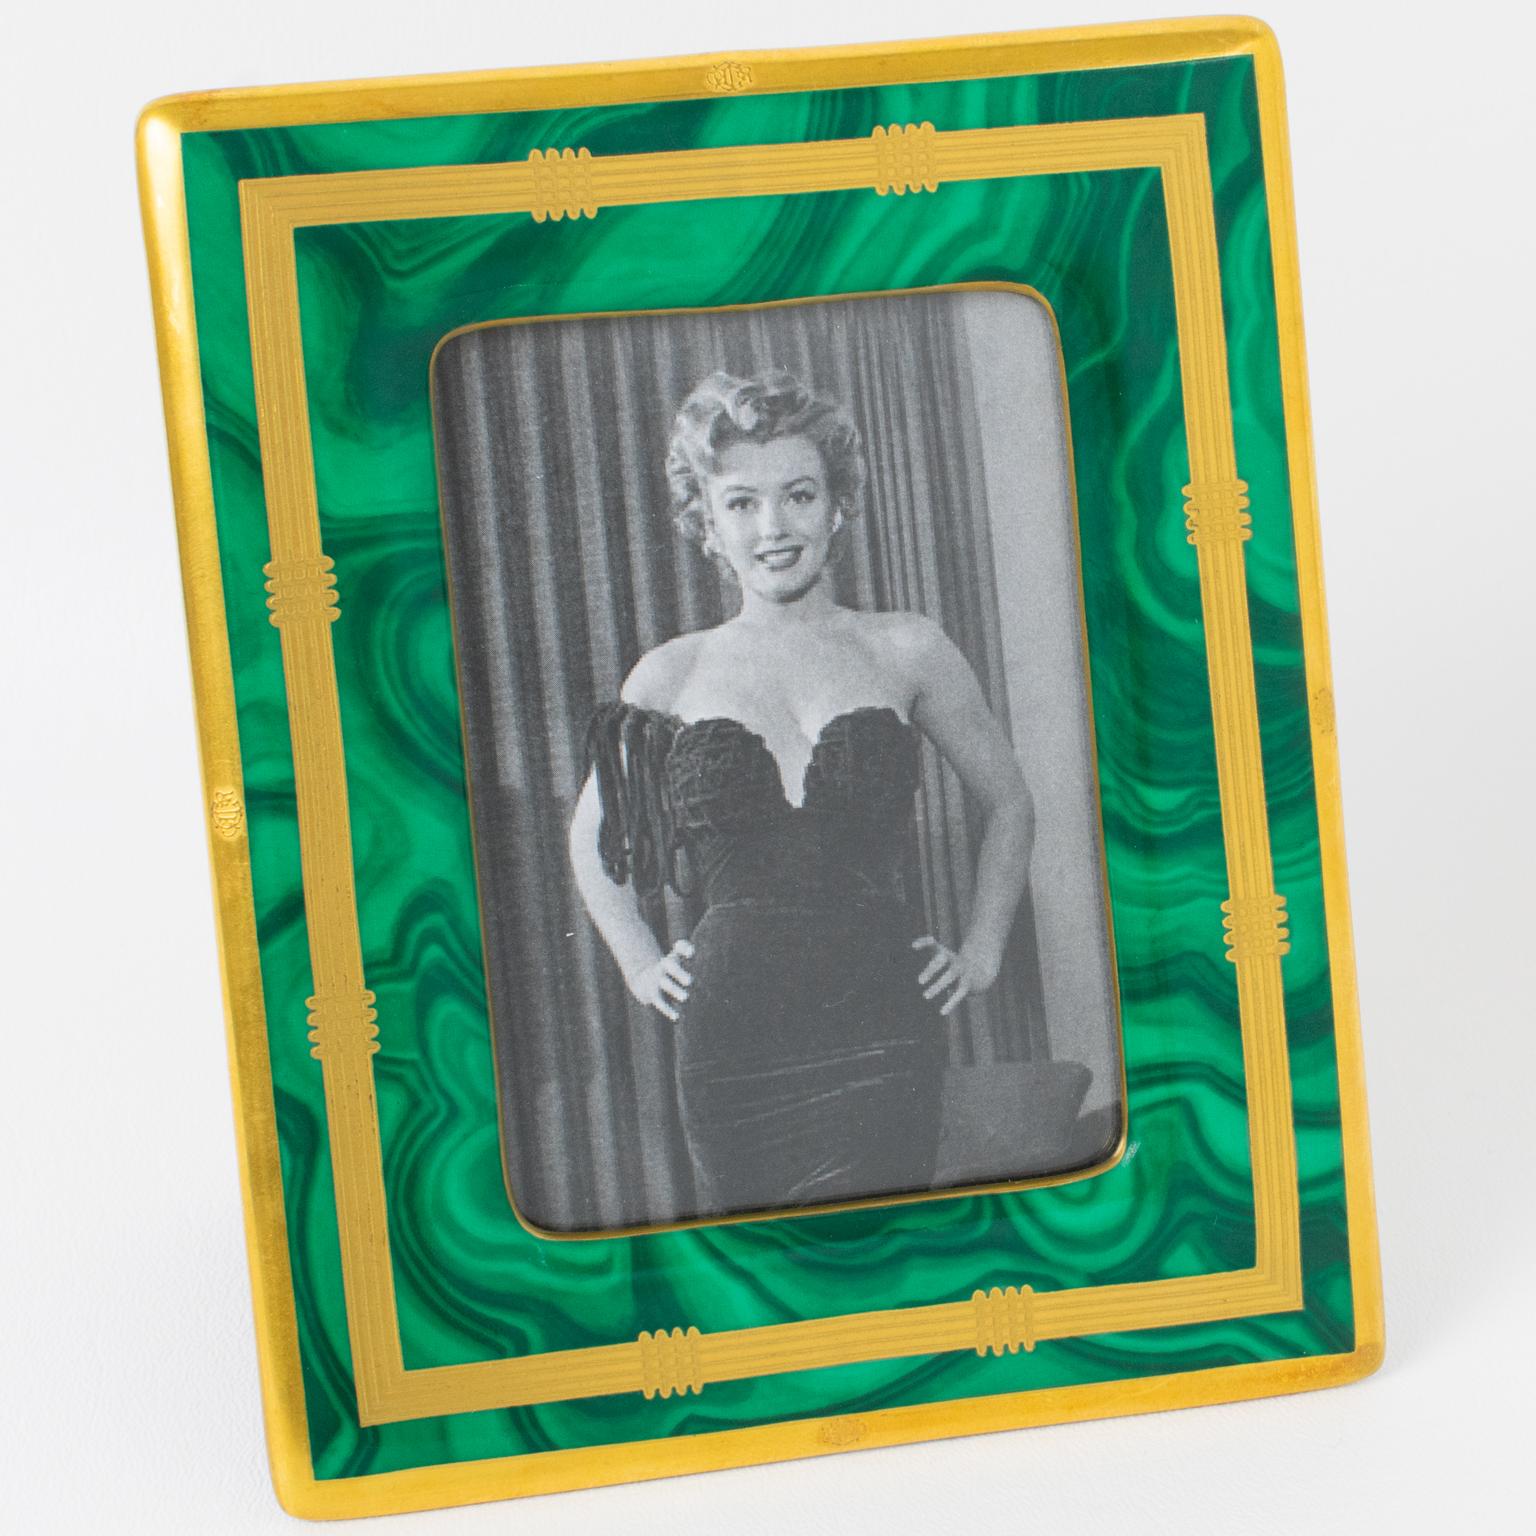 Lovely decorative picture photo frame, designed for the Christian Dior Home collection in the 1980s. Delicate ceramic slab with faux-Malachite textured pattern and gilt application. The easel and back are in felted black fabric. The 